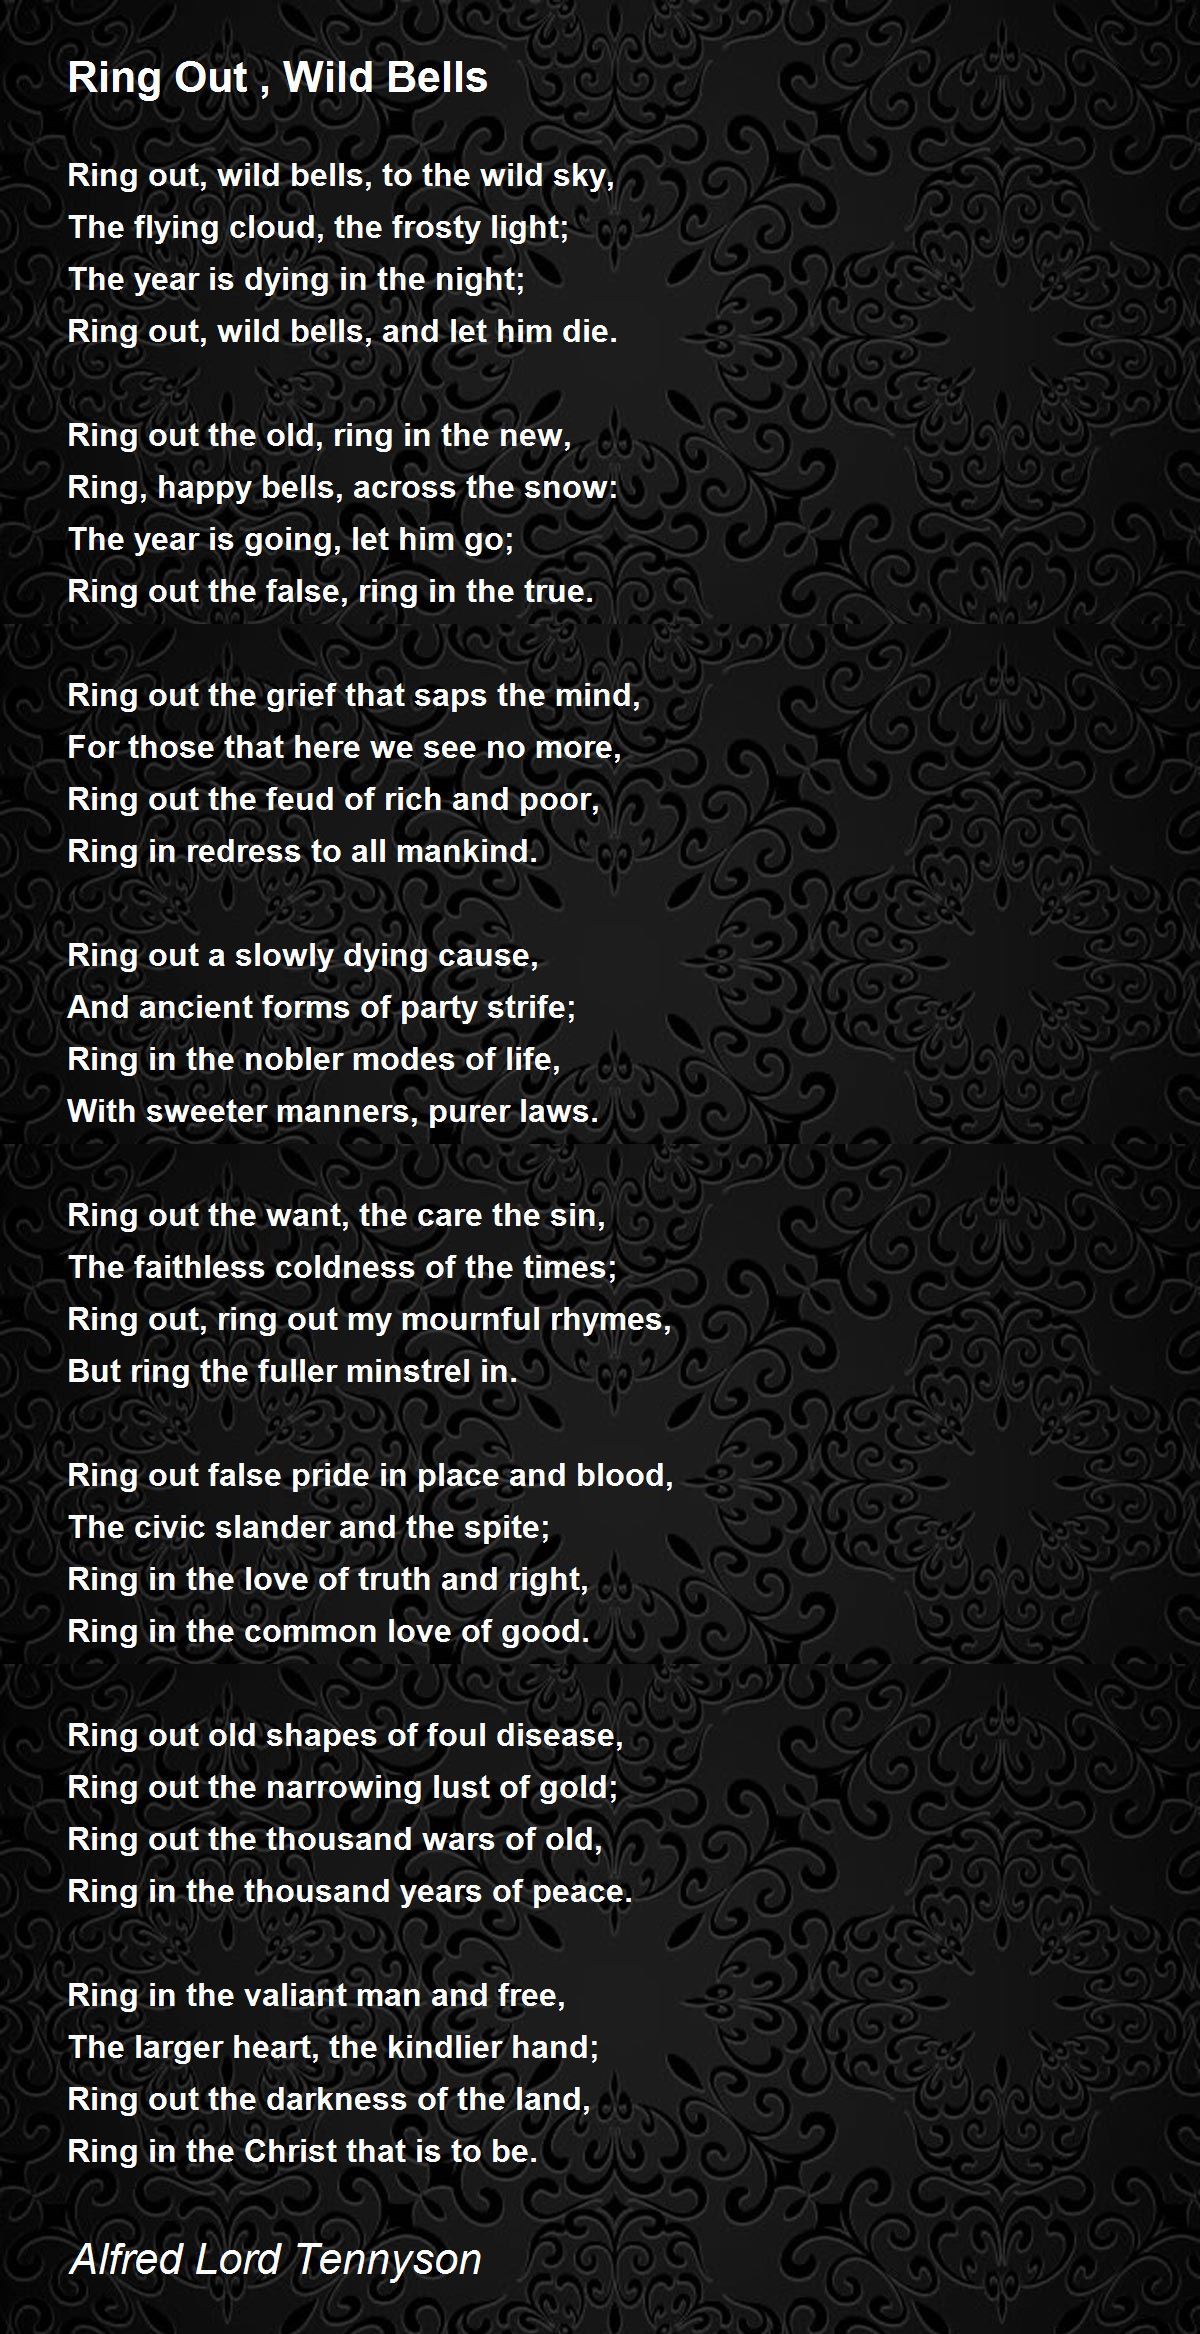 Ring Out , Wild Bells Poem by Alfred Lord Tennyson - Poem Hunter